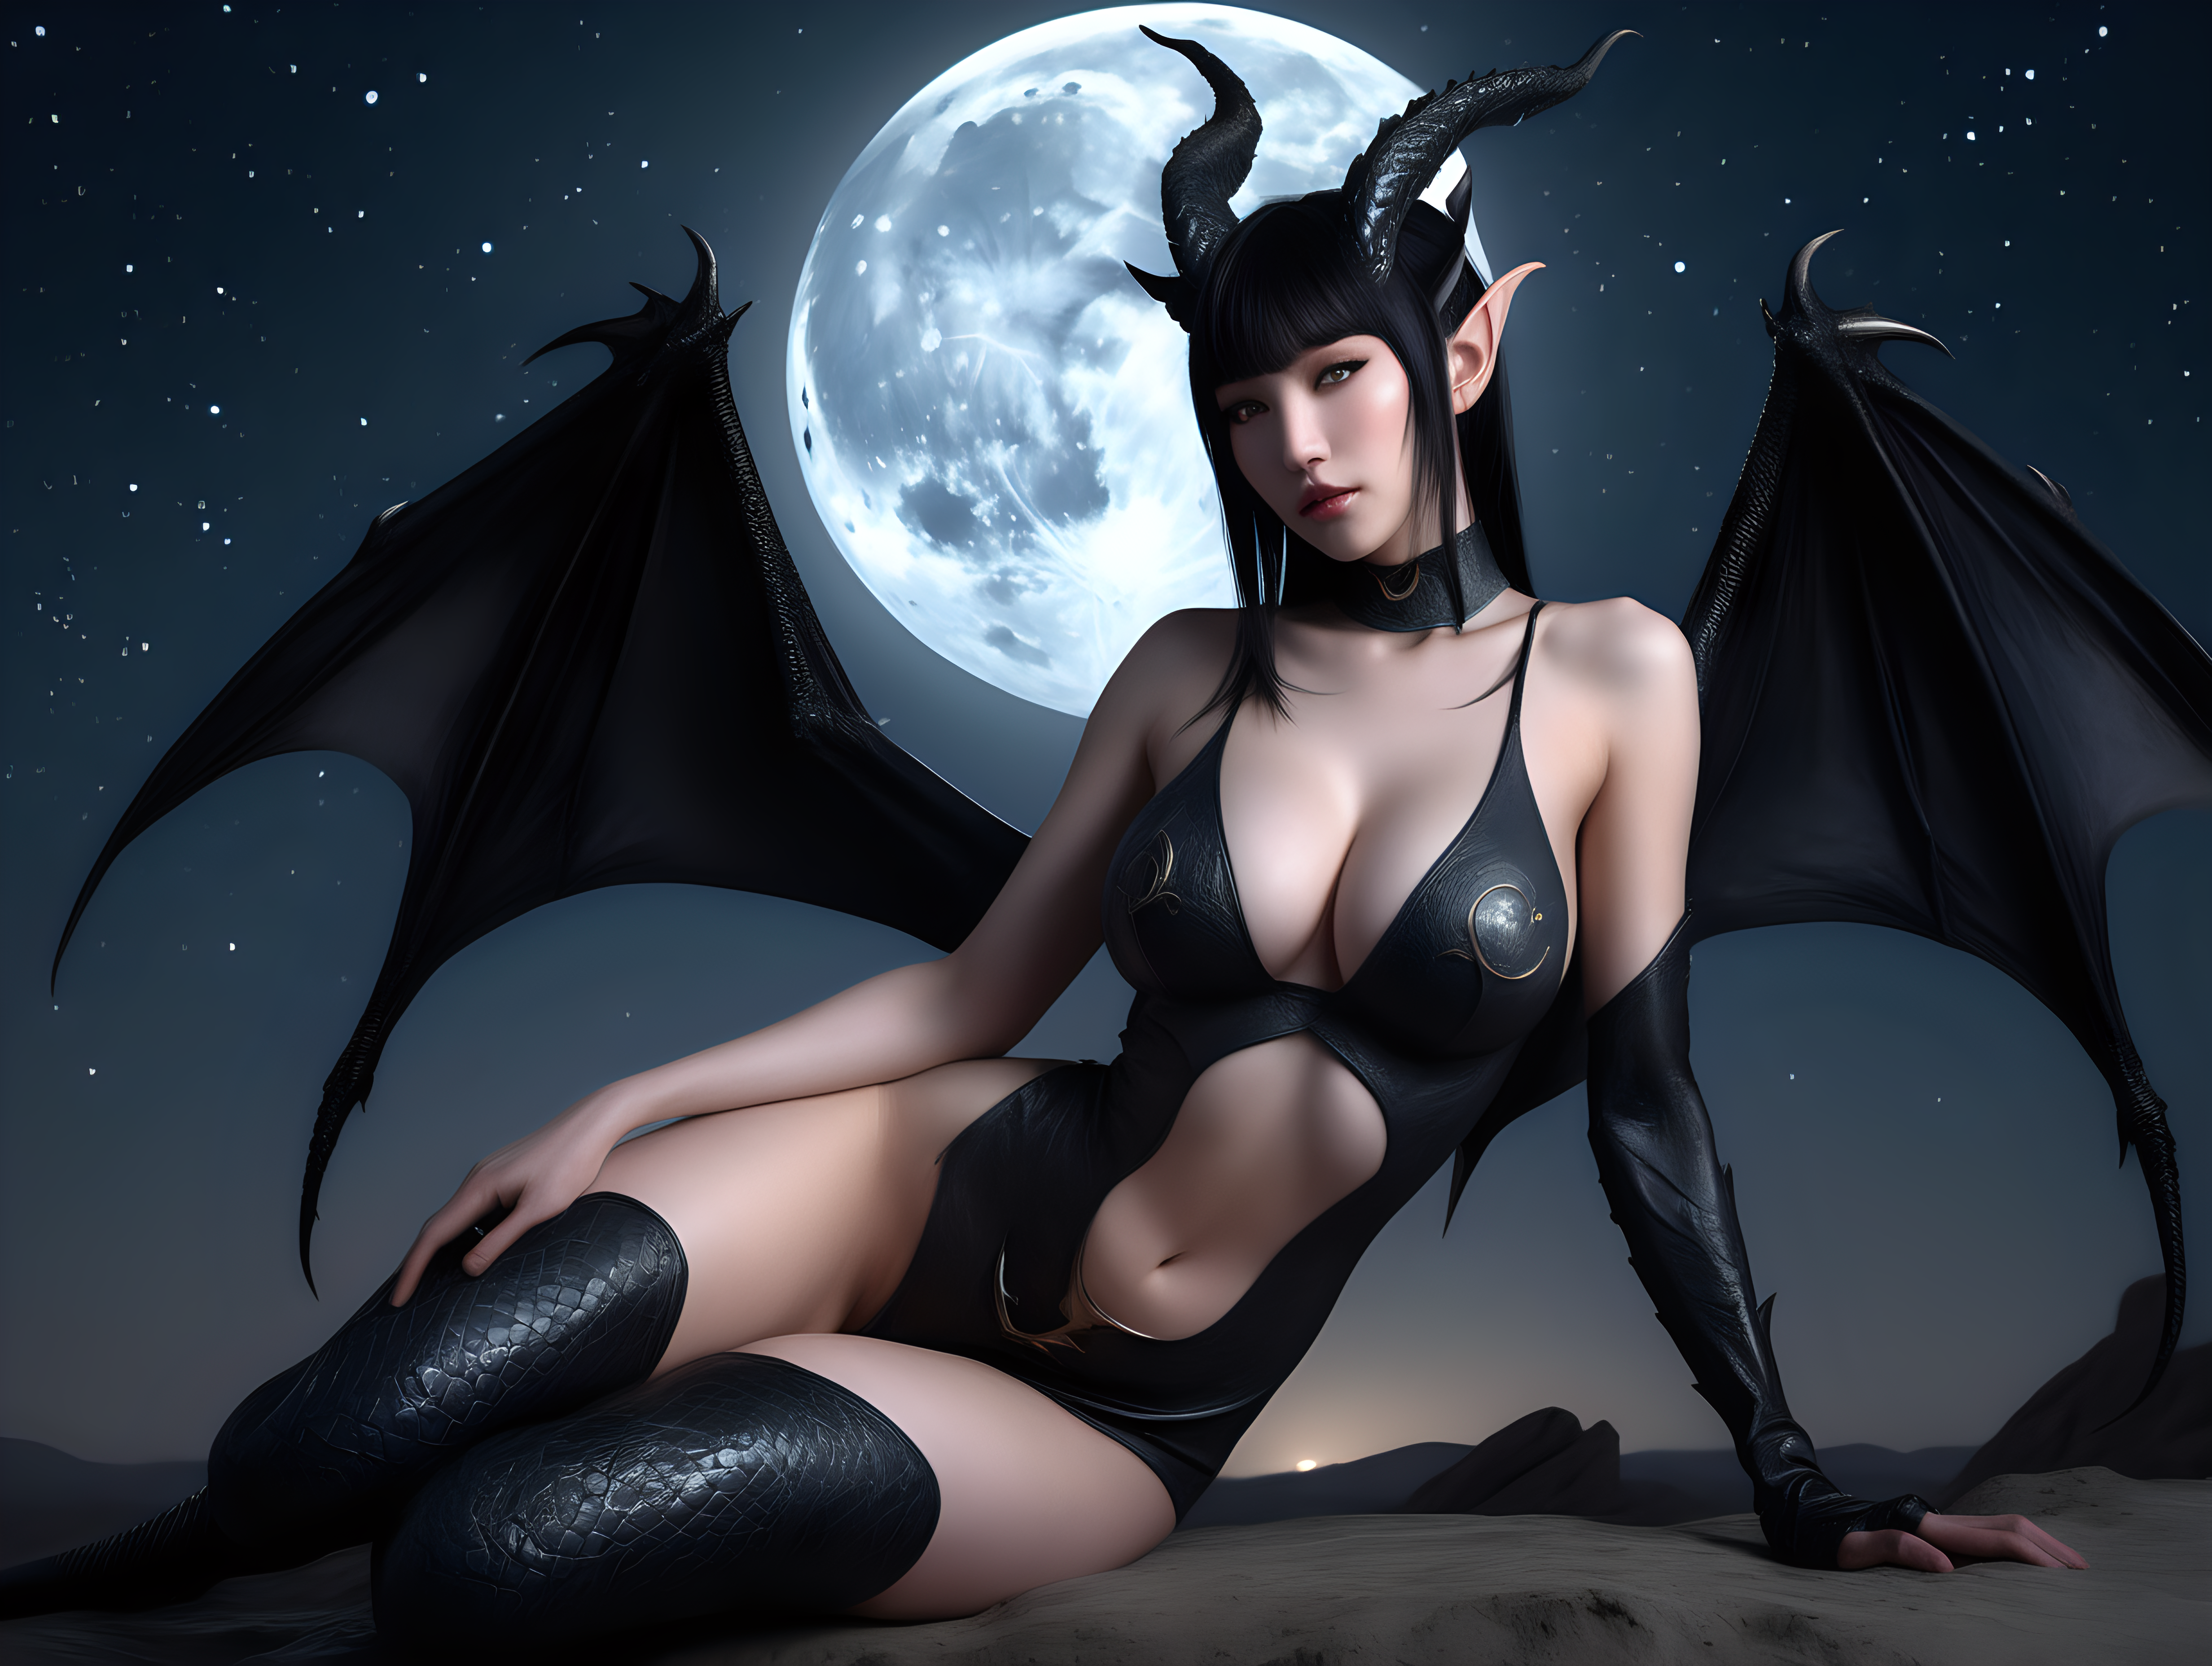 ultra-realistic high resolution and highly detailed adult film photoshoot of a slender female human dragon, with sleek pointy black horns gently swept straight backwards over head, with massive breasts, she has draconic symbols on arms and body, sitting with a starry sky and the moon in the background, looking at the camera